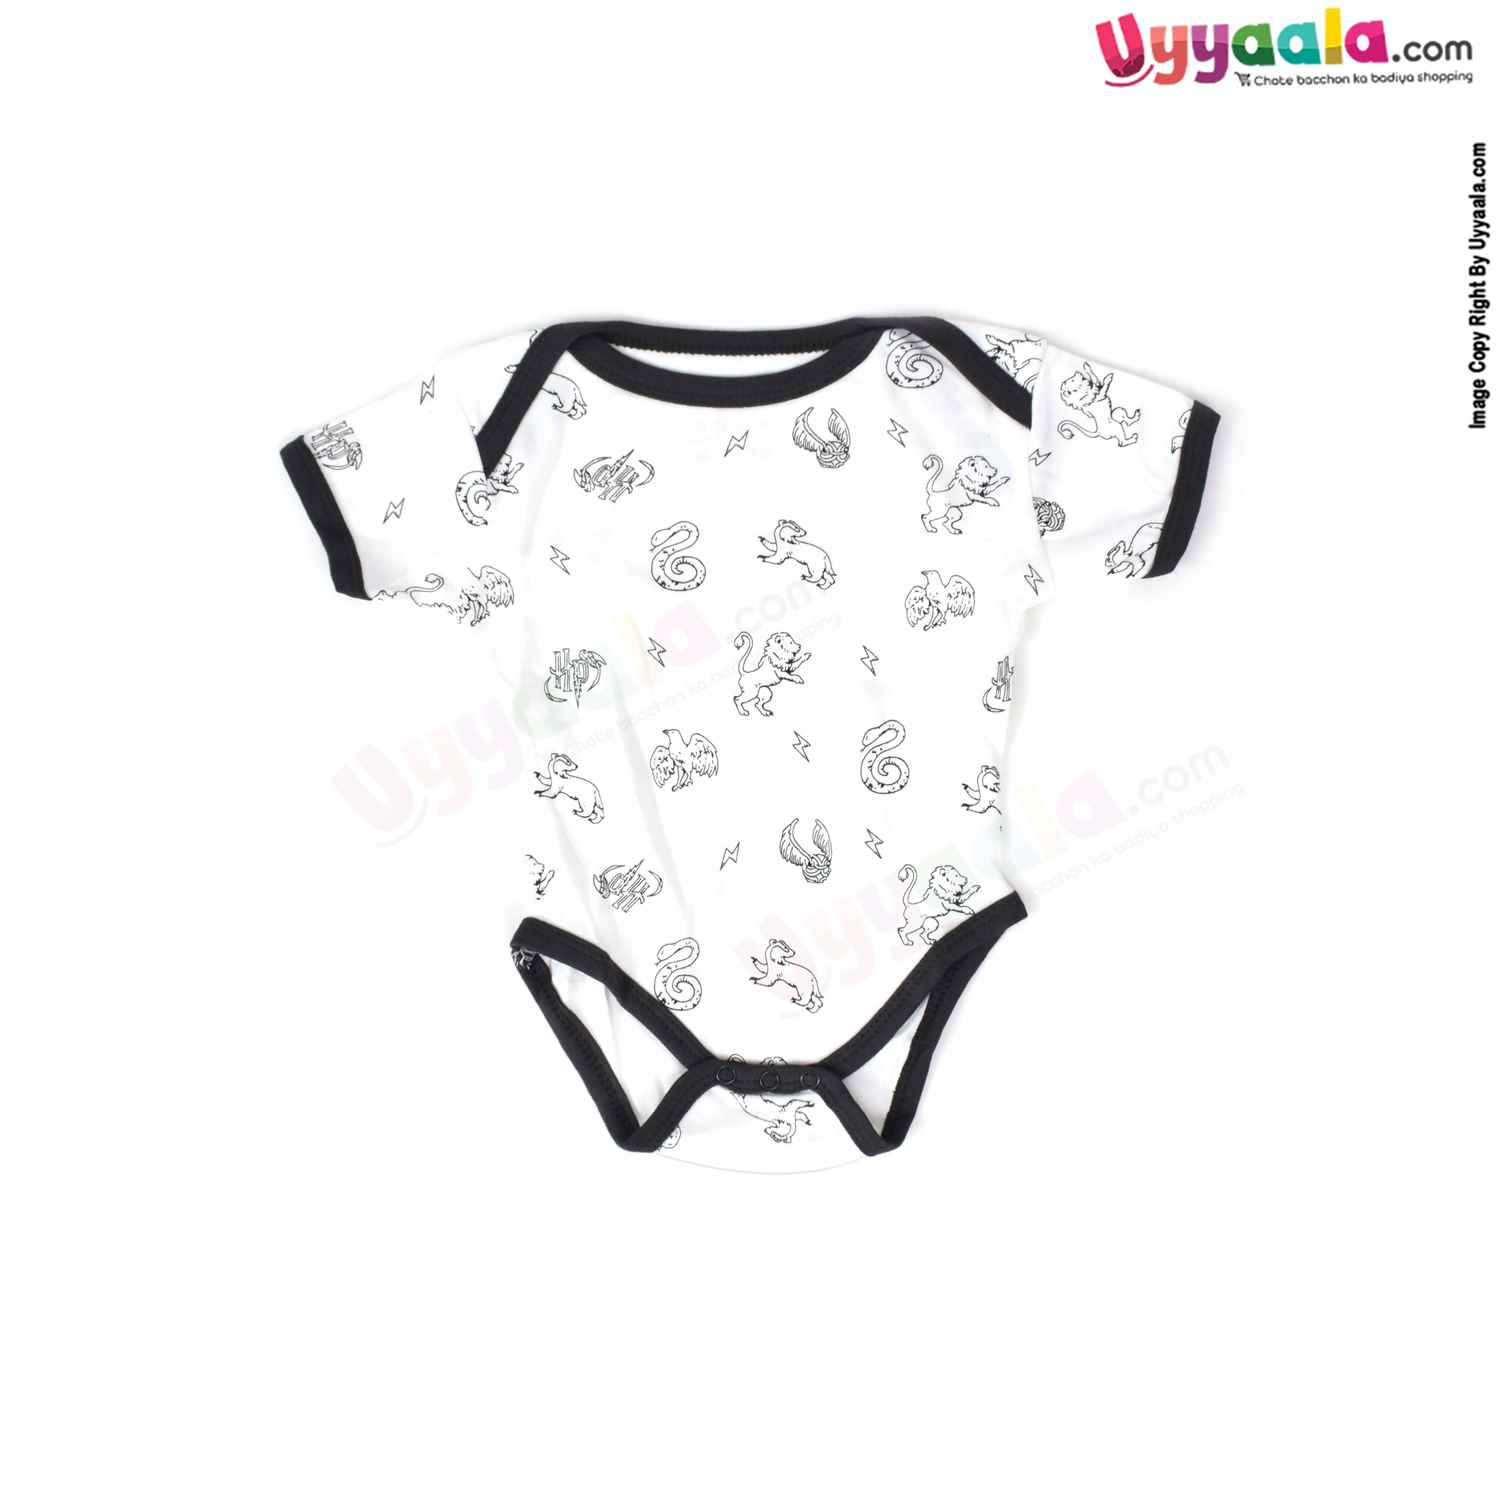 Precious One Short Sleeve Body Suit 100% Soft Hosiery Cotton - White with black borders Animals Print (6-9M)